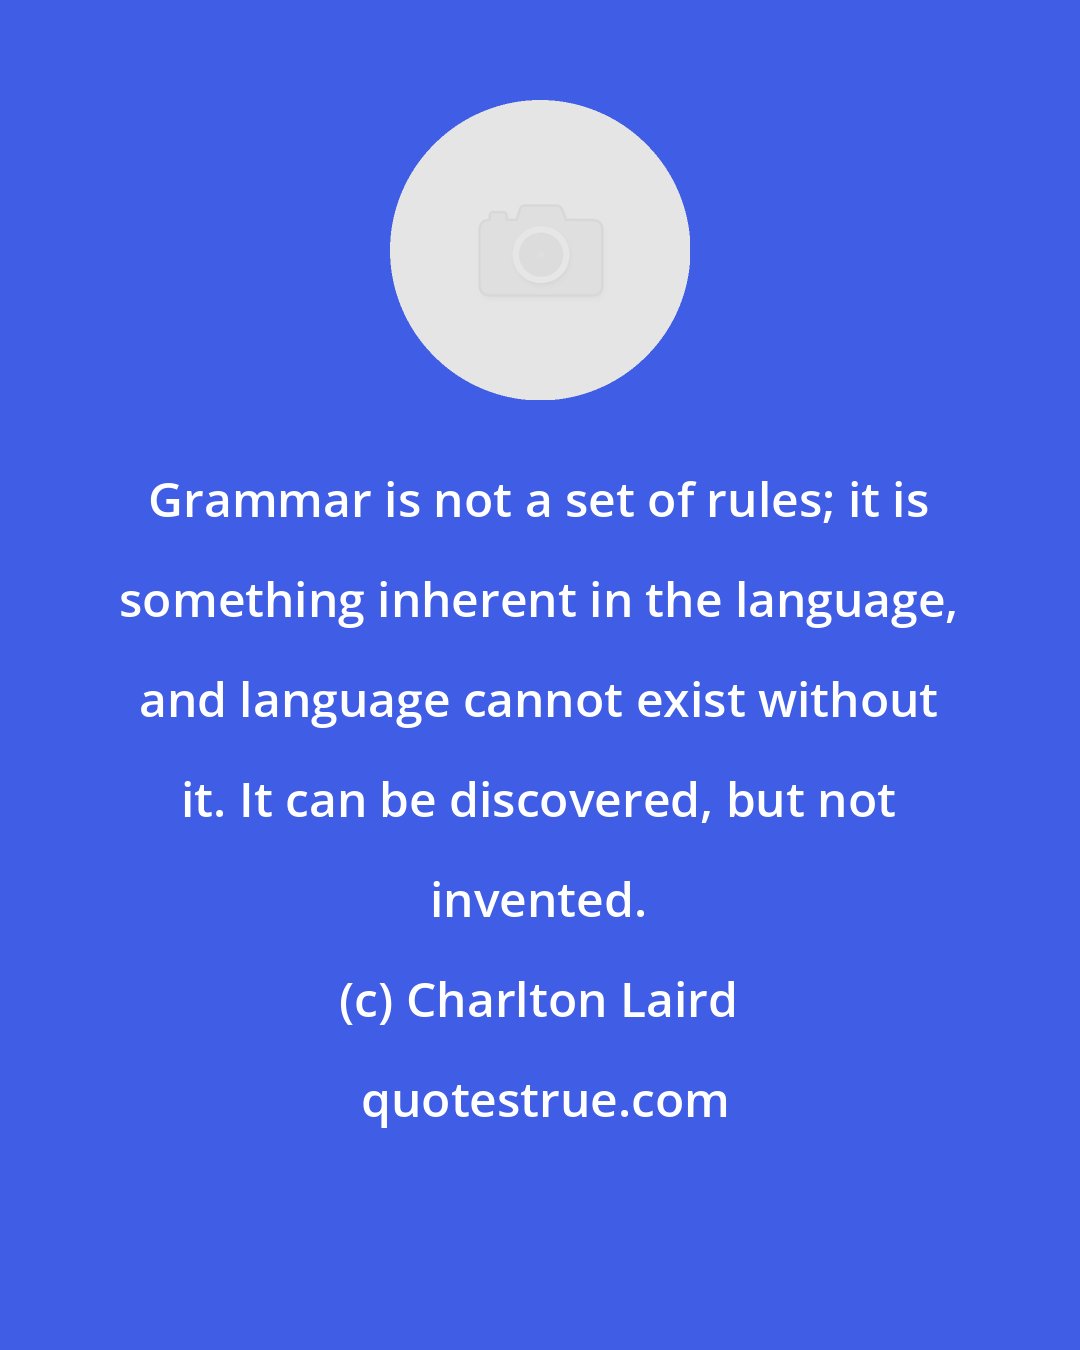 Charlton Laird: Grammar is not a set of rules; it is something inherent in the language, and language cannot exist without it. It can be discovered, but not invented.